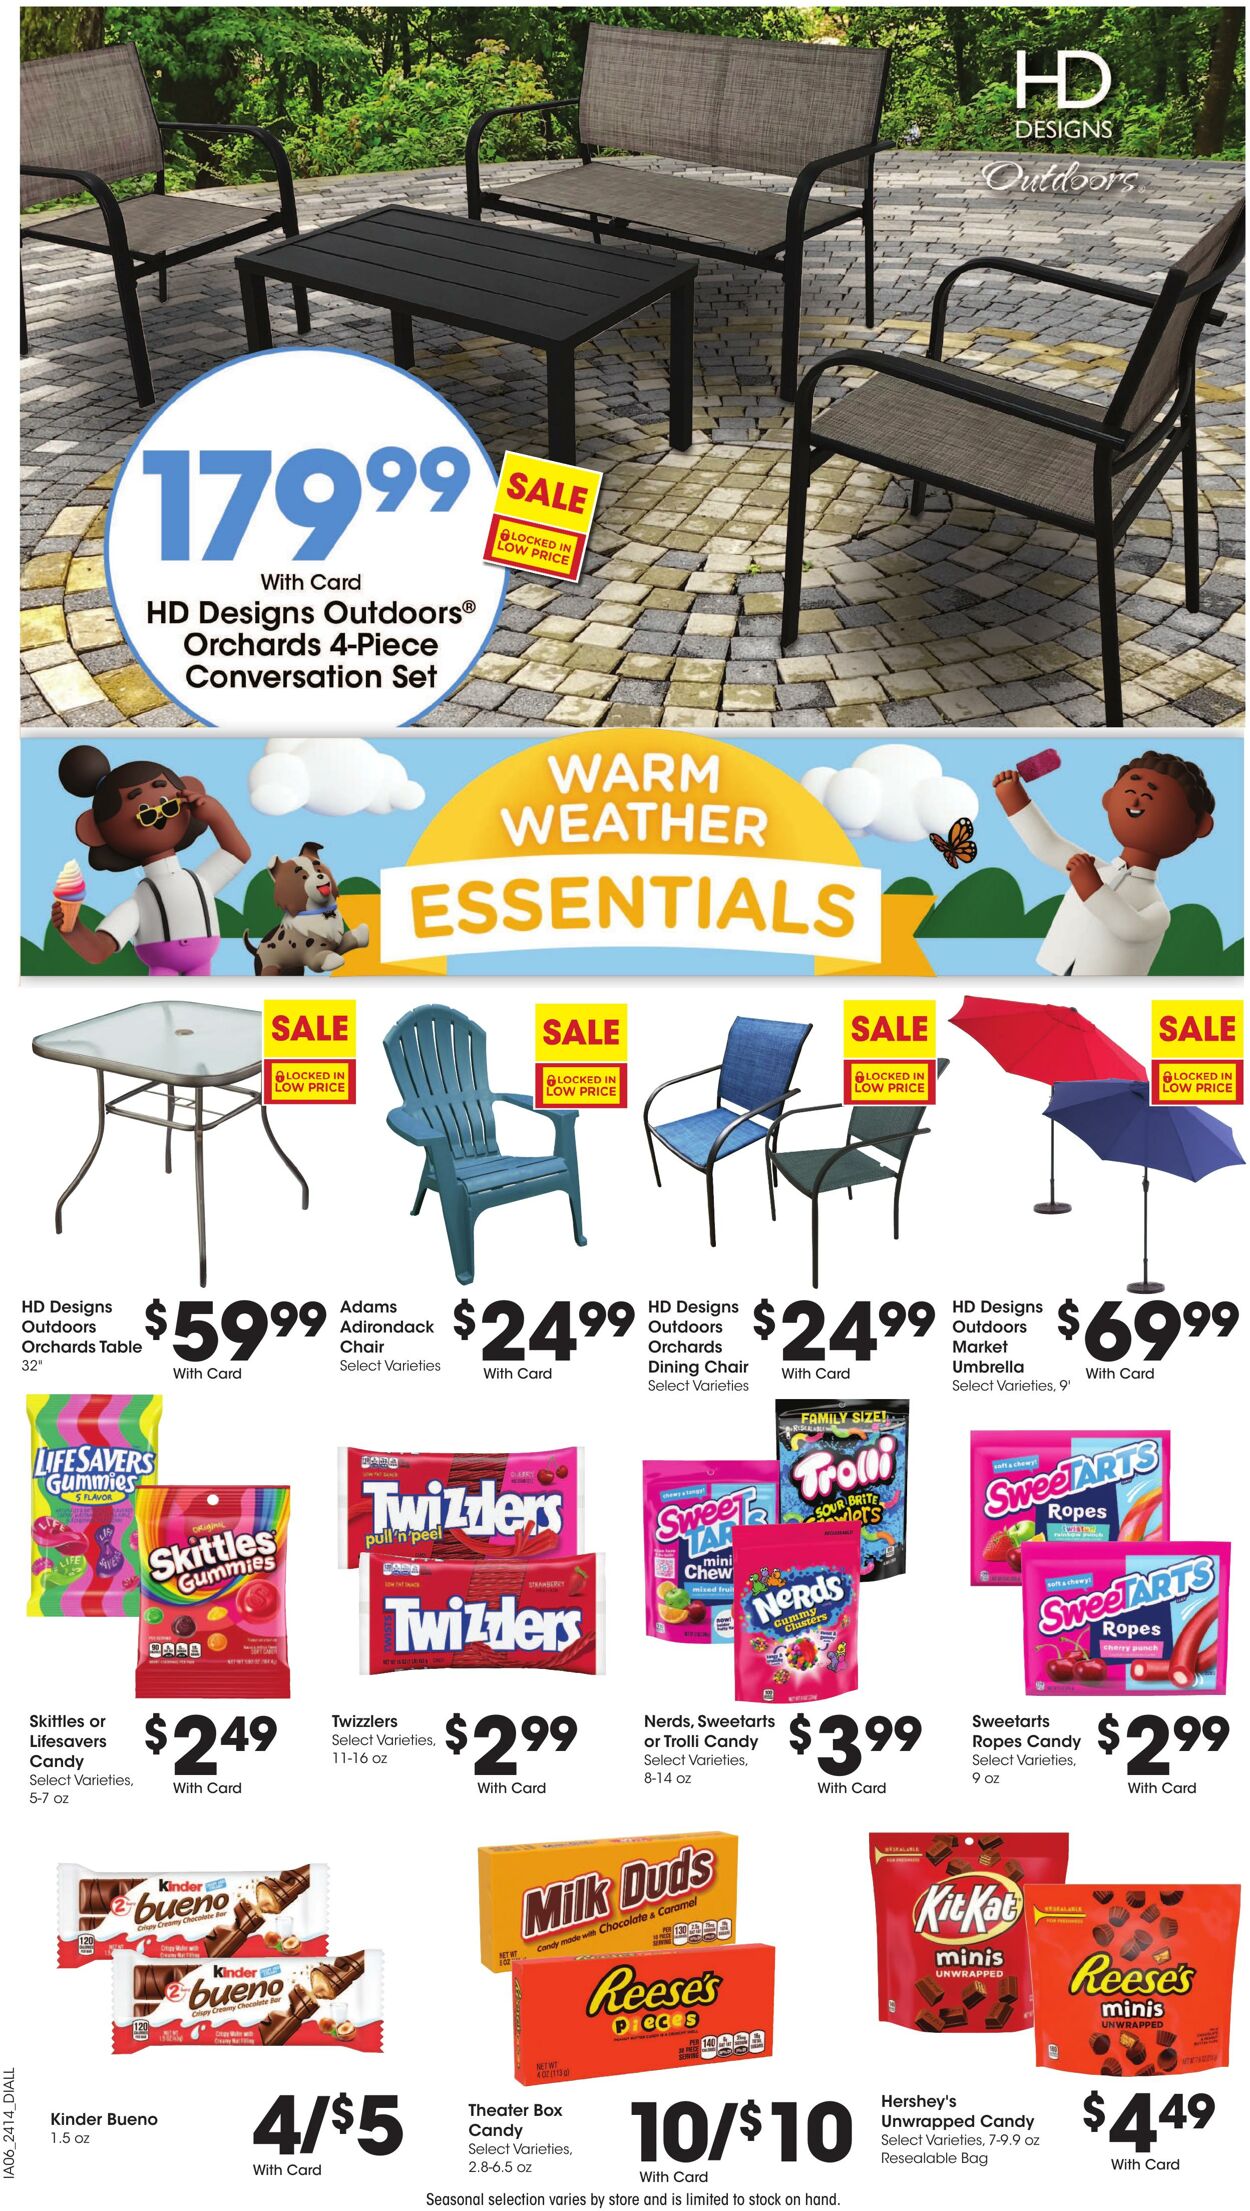 Weekly ad Baker's 05/08/2024 - 05/14/2024